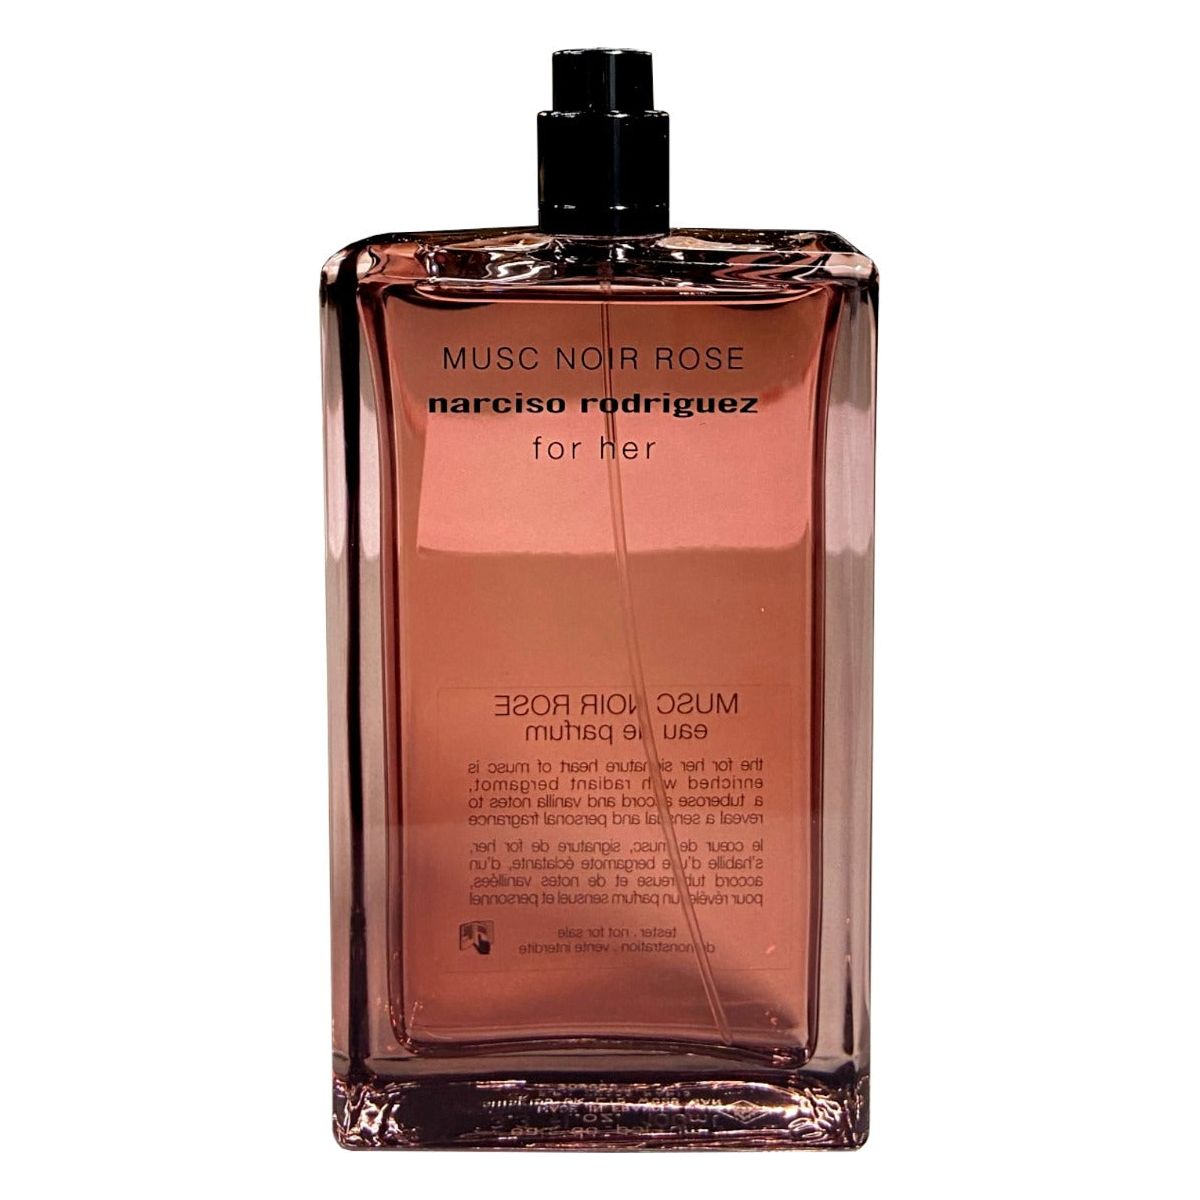 Musc Noir Rose For Her Narciso Rodriguez perfume - a new fragrance